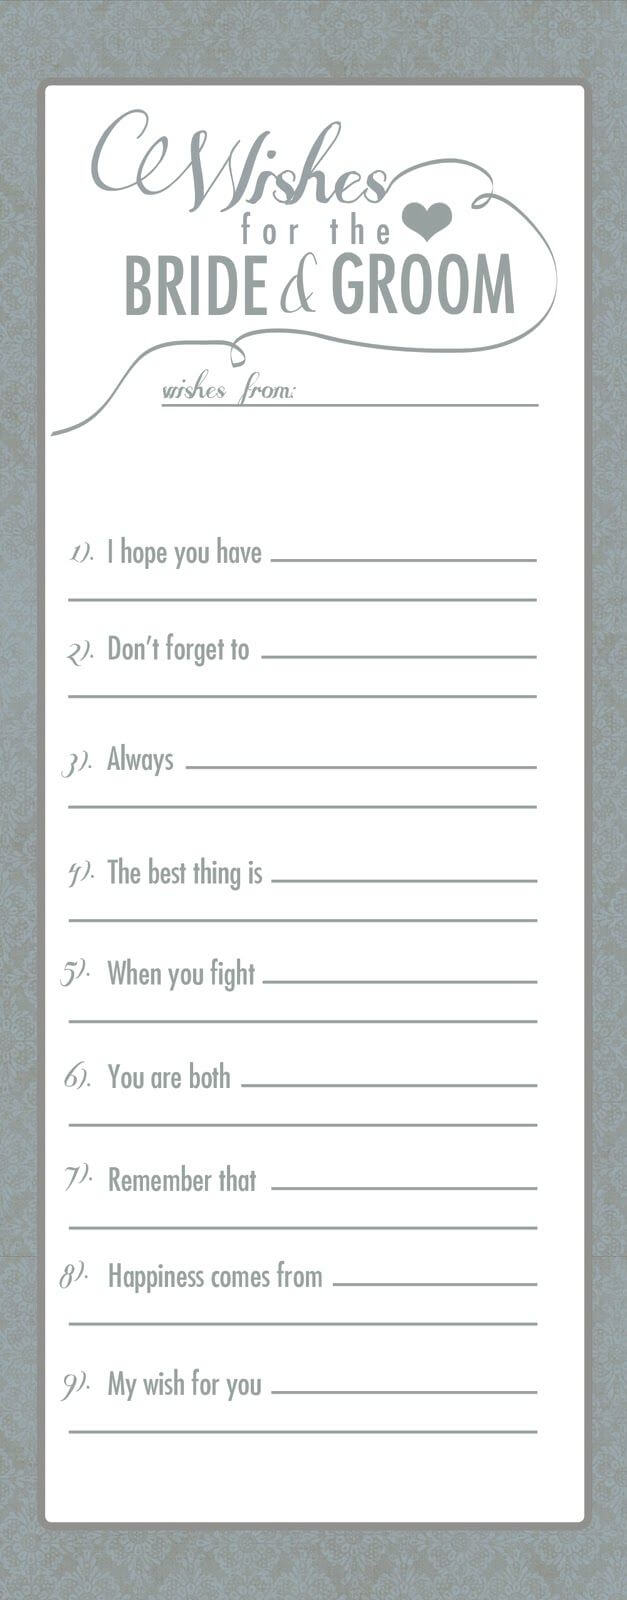 Wedding Stationery Breakdown In Marriage Advice Cards Templates